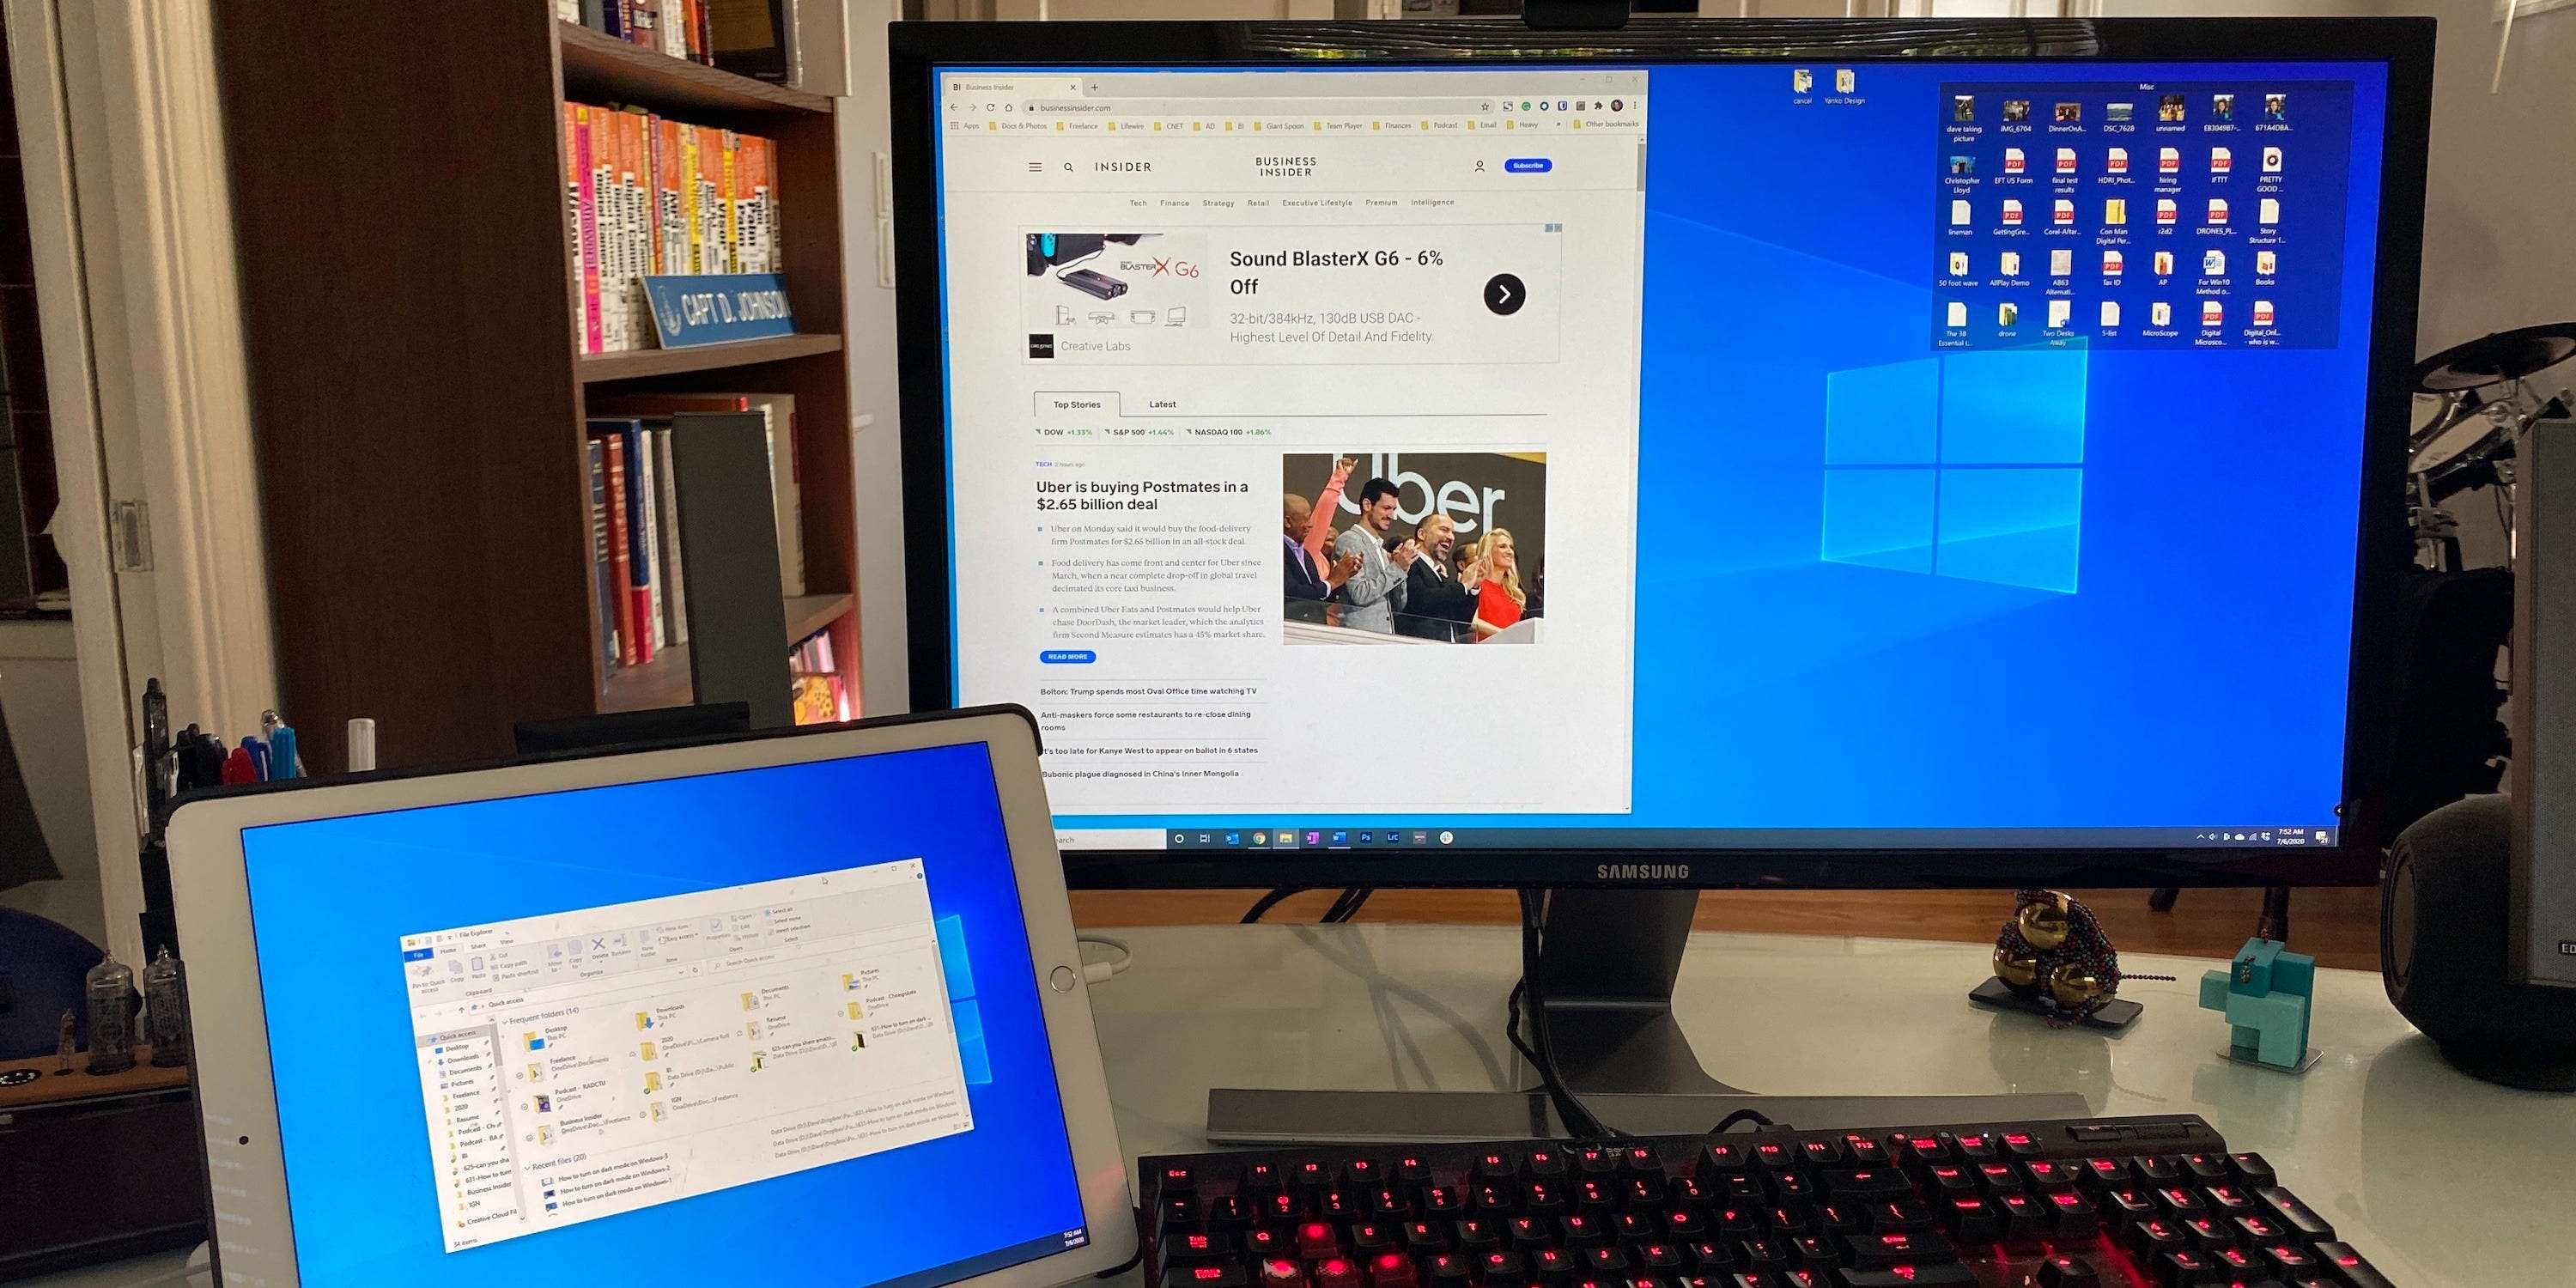 How To Use An Ipad As A Second Monitor For A Windows Pc